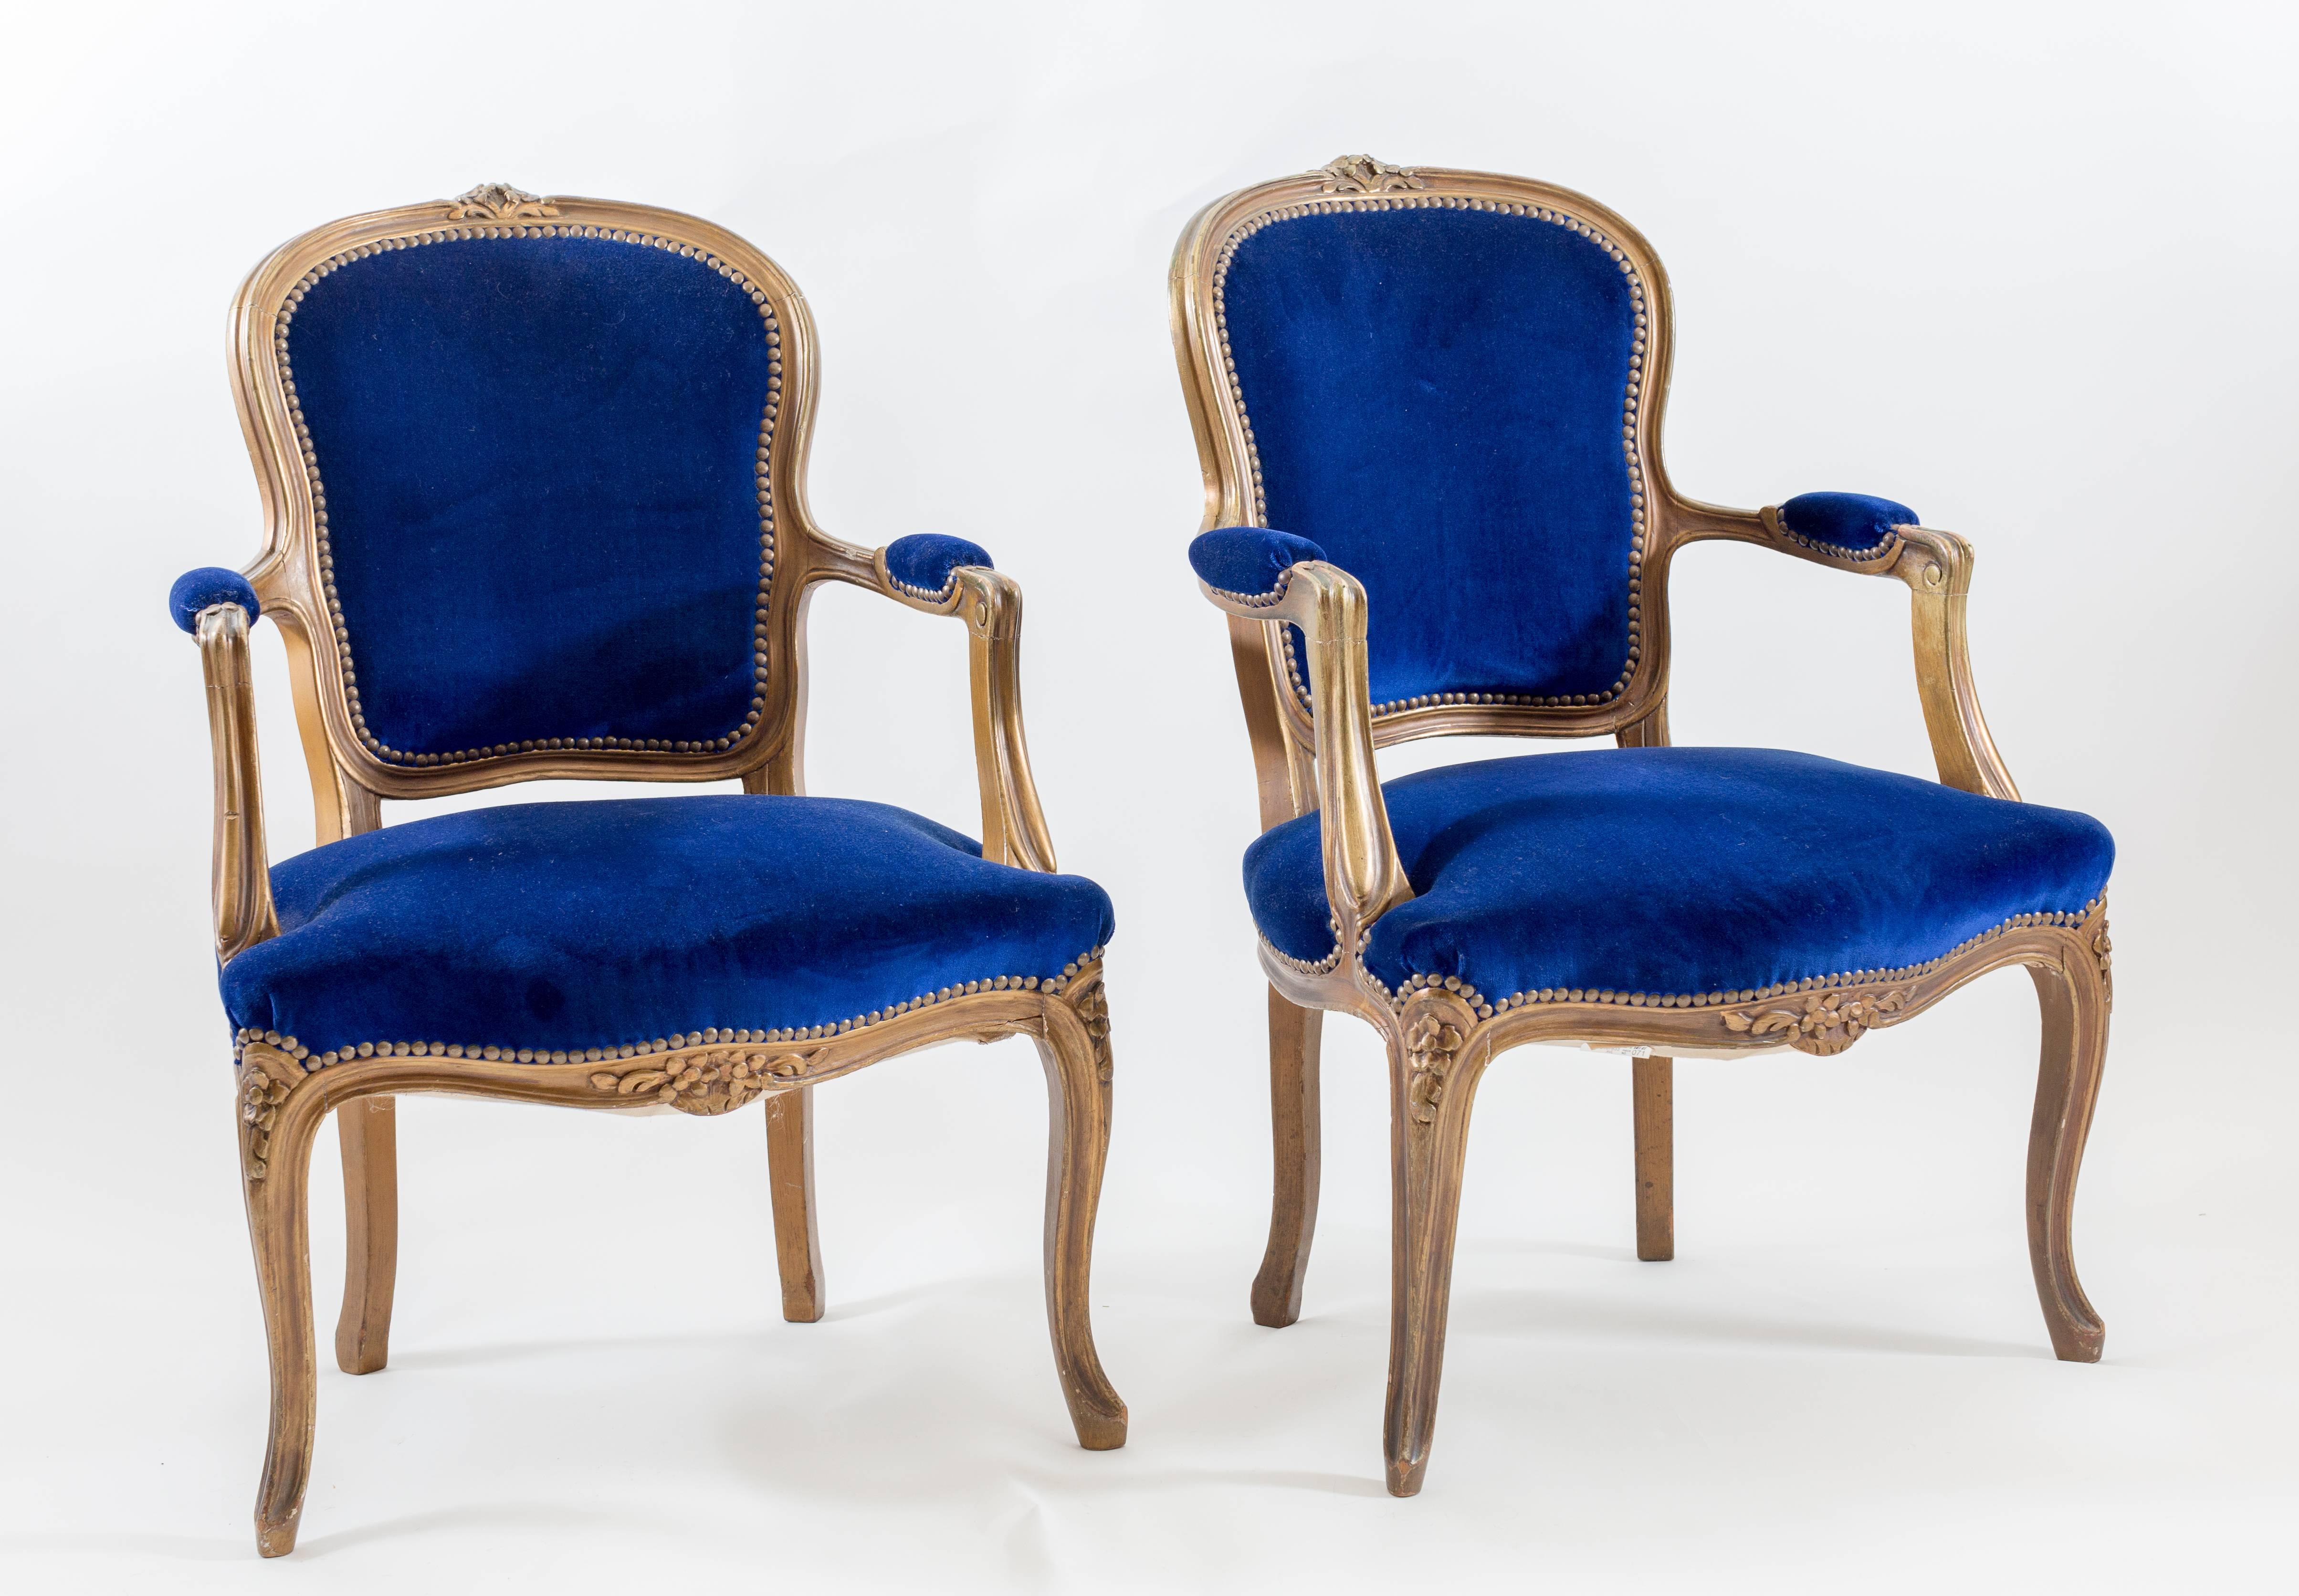 Gold leaf trimmed fruitwood, cobalt blue velvet uphostery, in Louis detail. Love these chairs!!